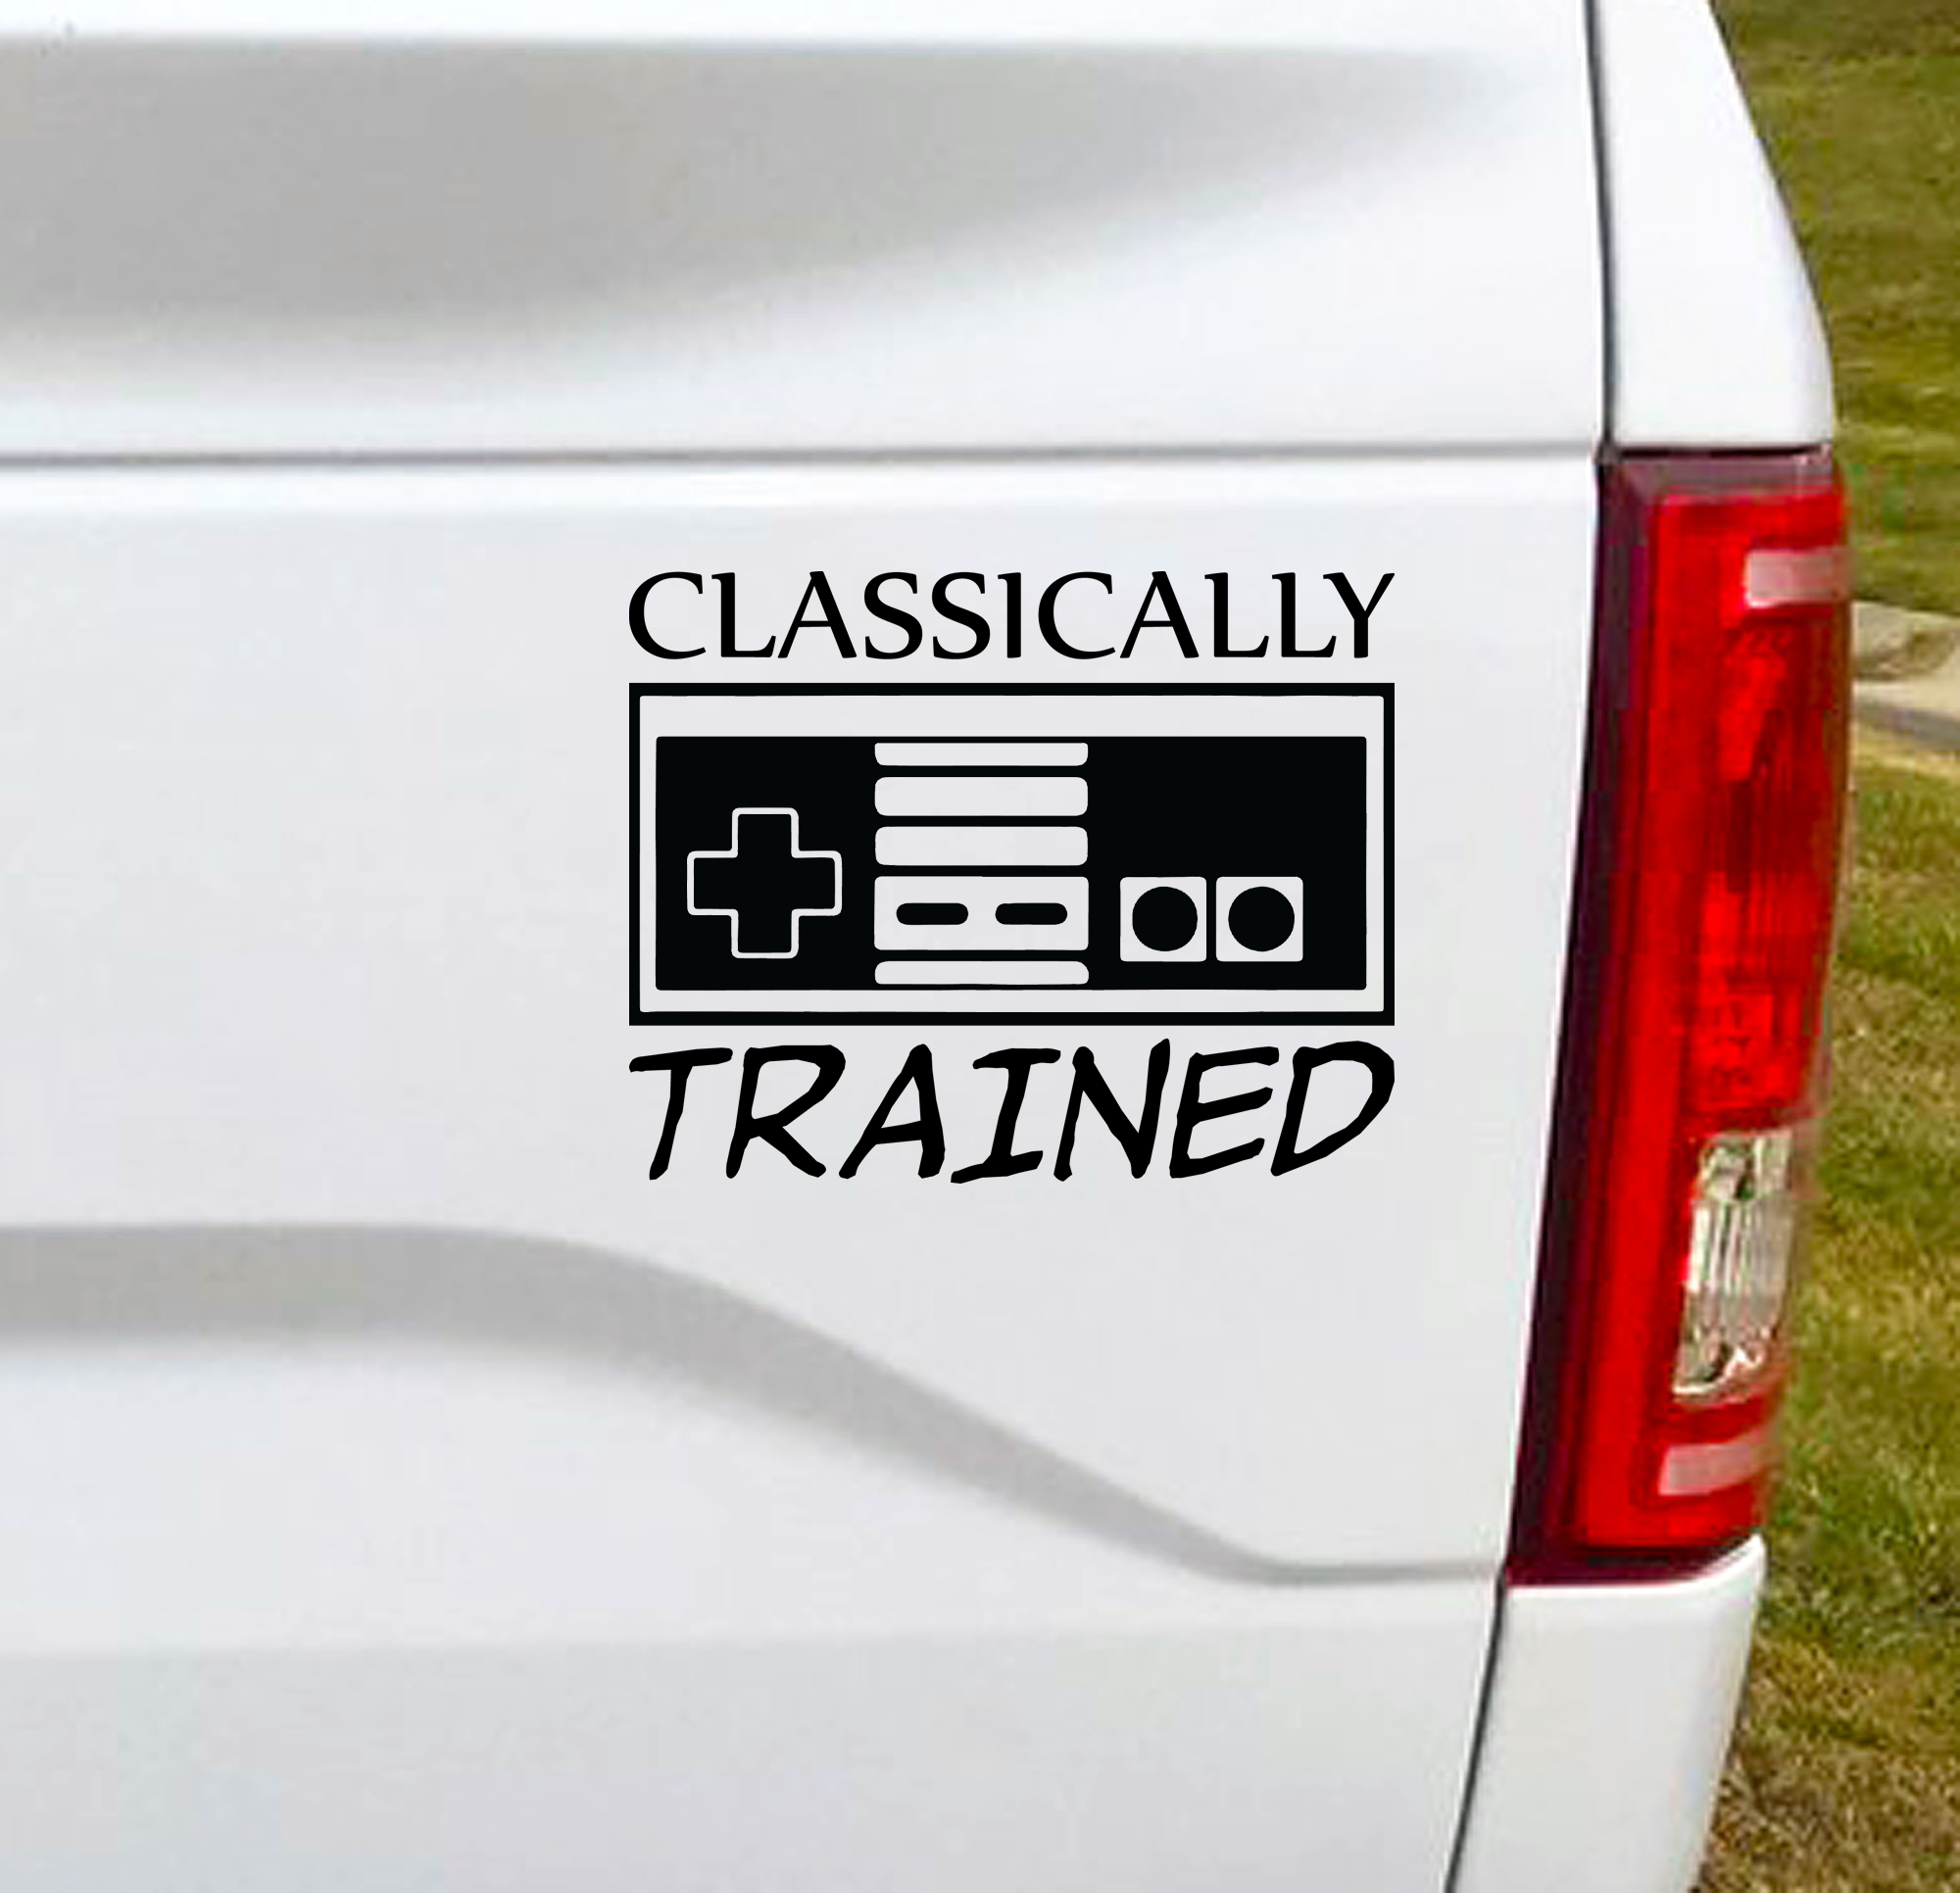 Classically Trained funny car decal. Will date you to a revolutionary time when video games were making huge leaps forward...pun intended.  5"W x 4"H Funny Car Decal, Car Sticker, Car Vinyl, Bumper Sticker, Vinyl Stickers, Vinyl Sticker.